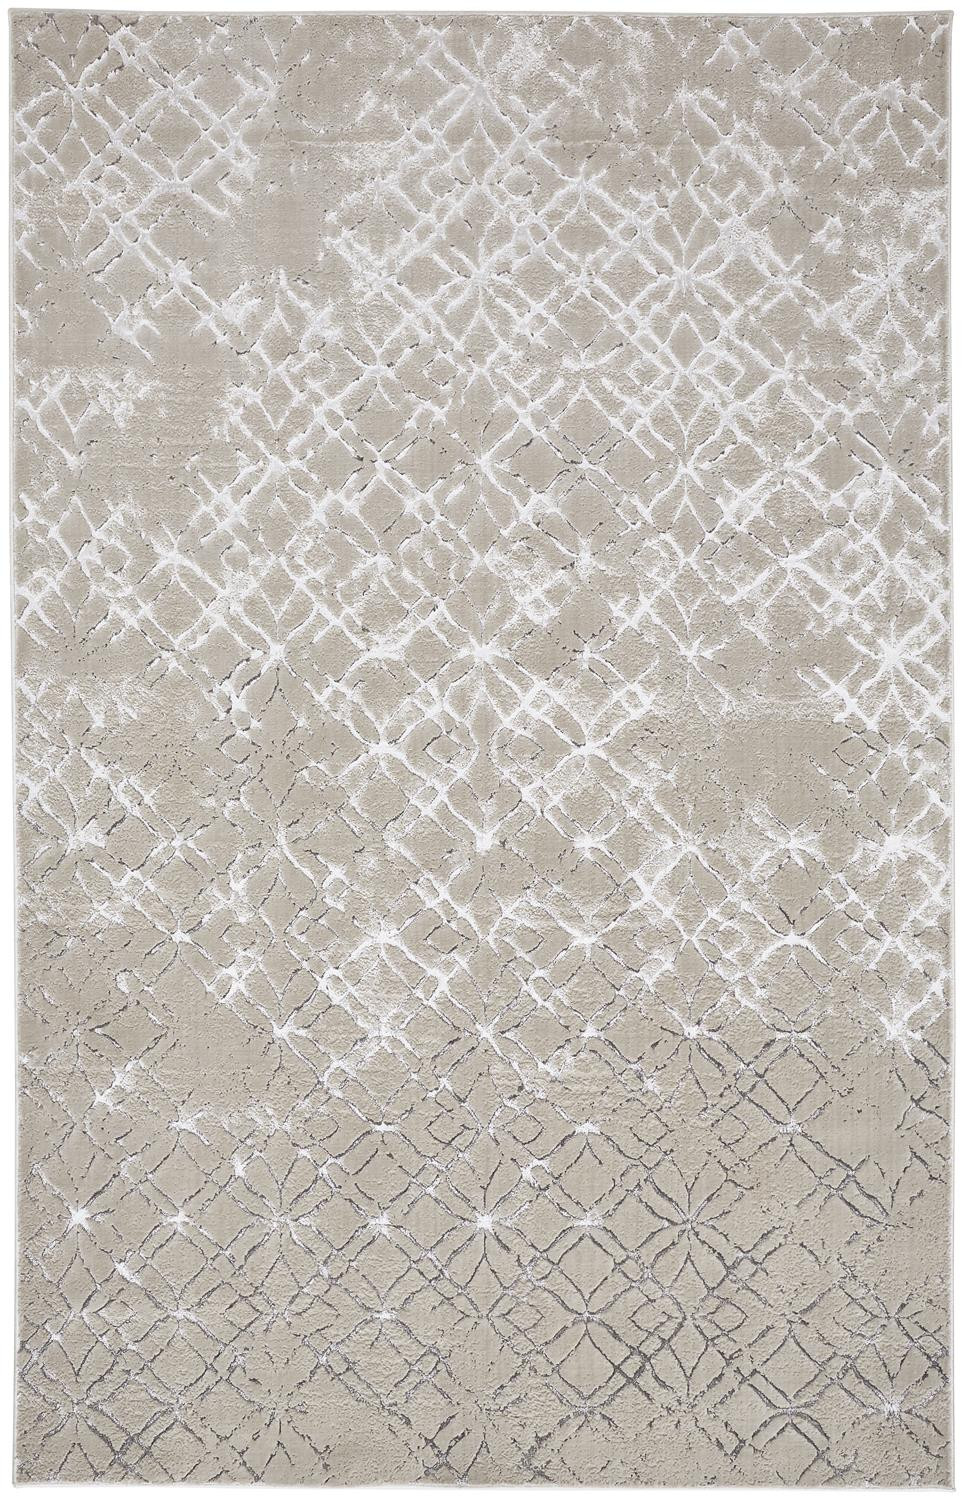 12' X 15' Silver Gray And White Abstract Area Rug-511502-1